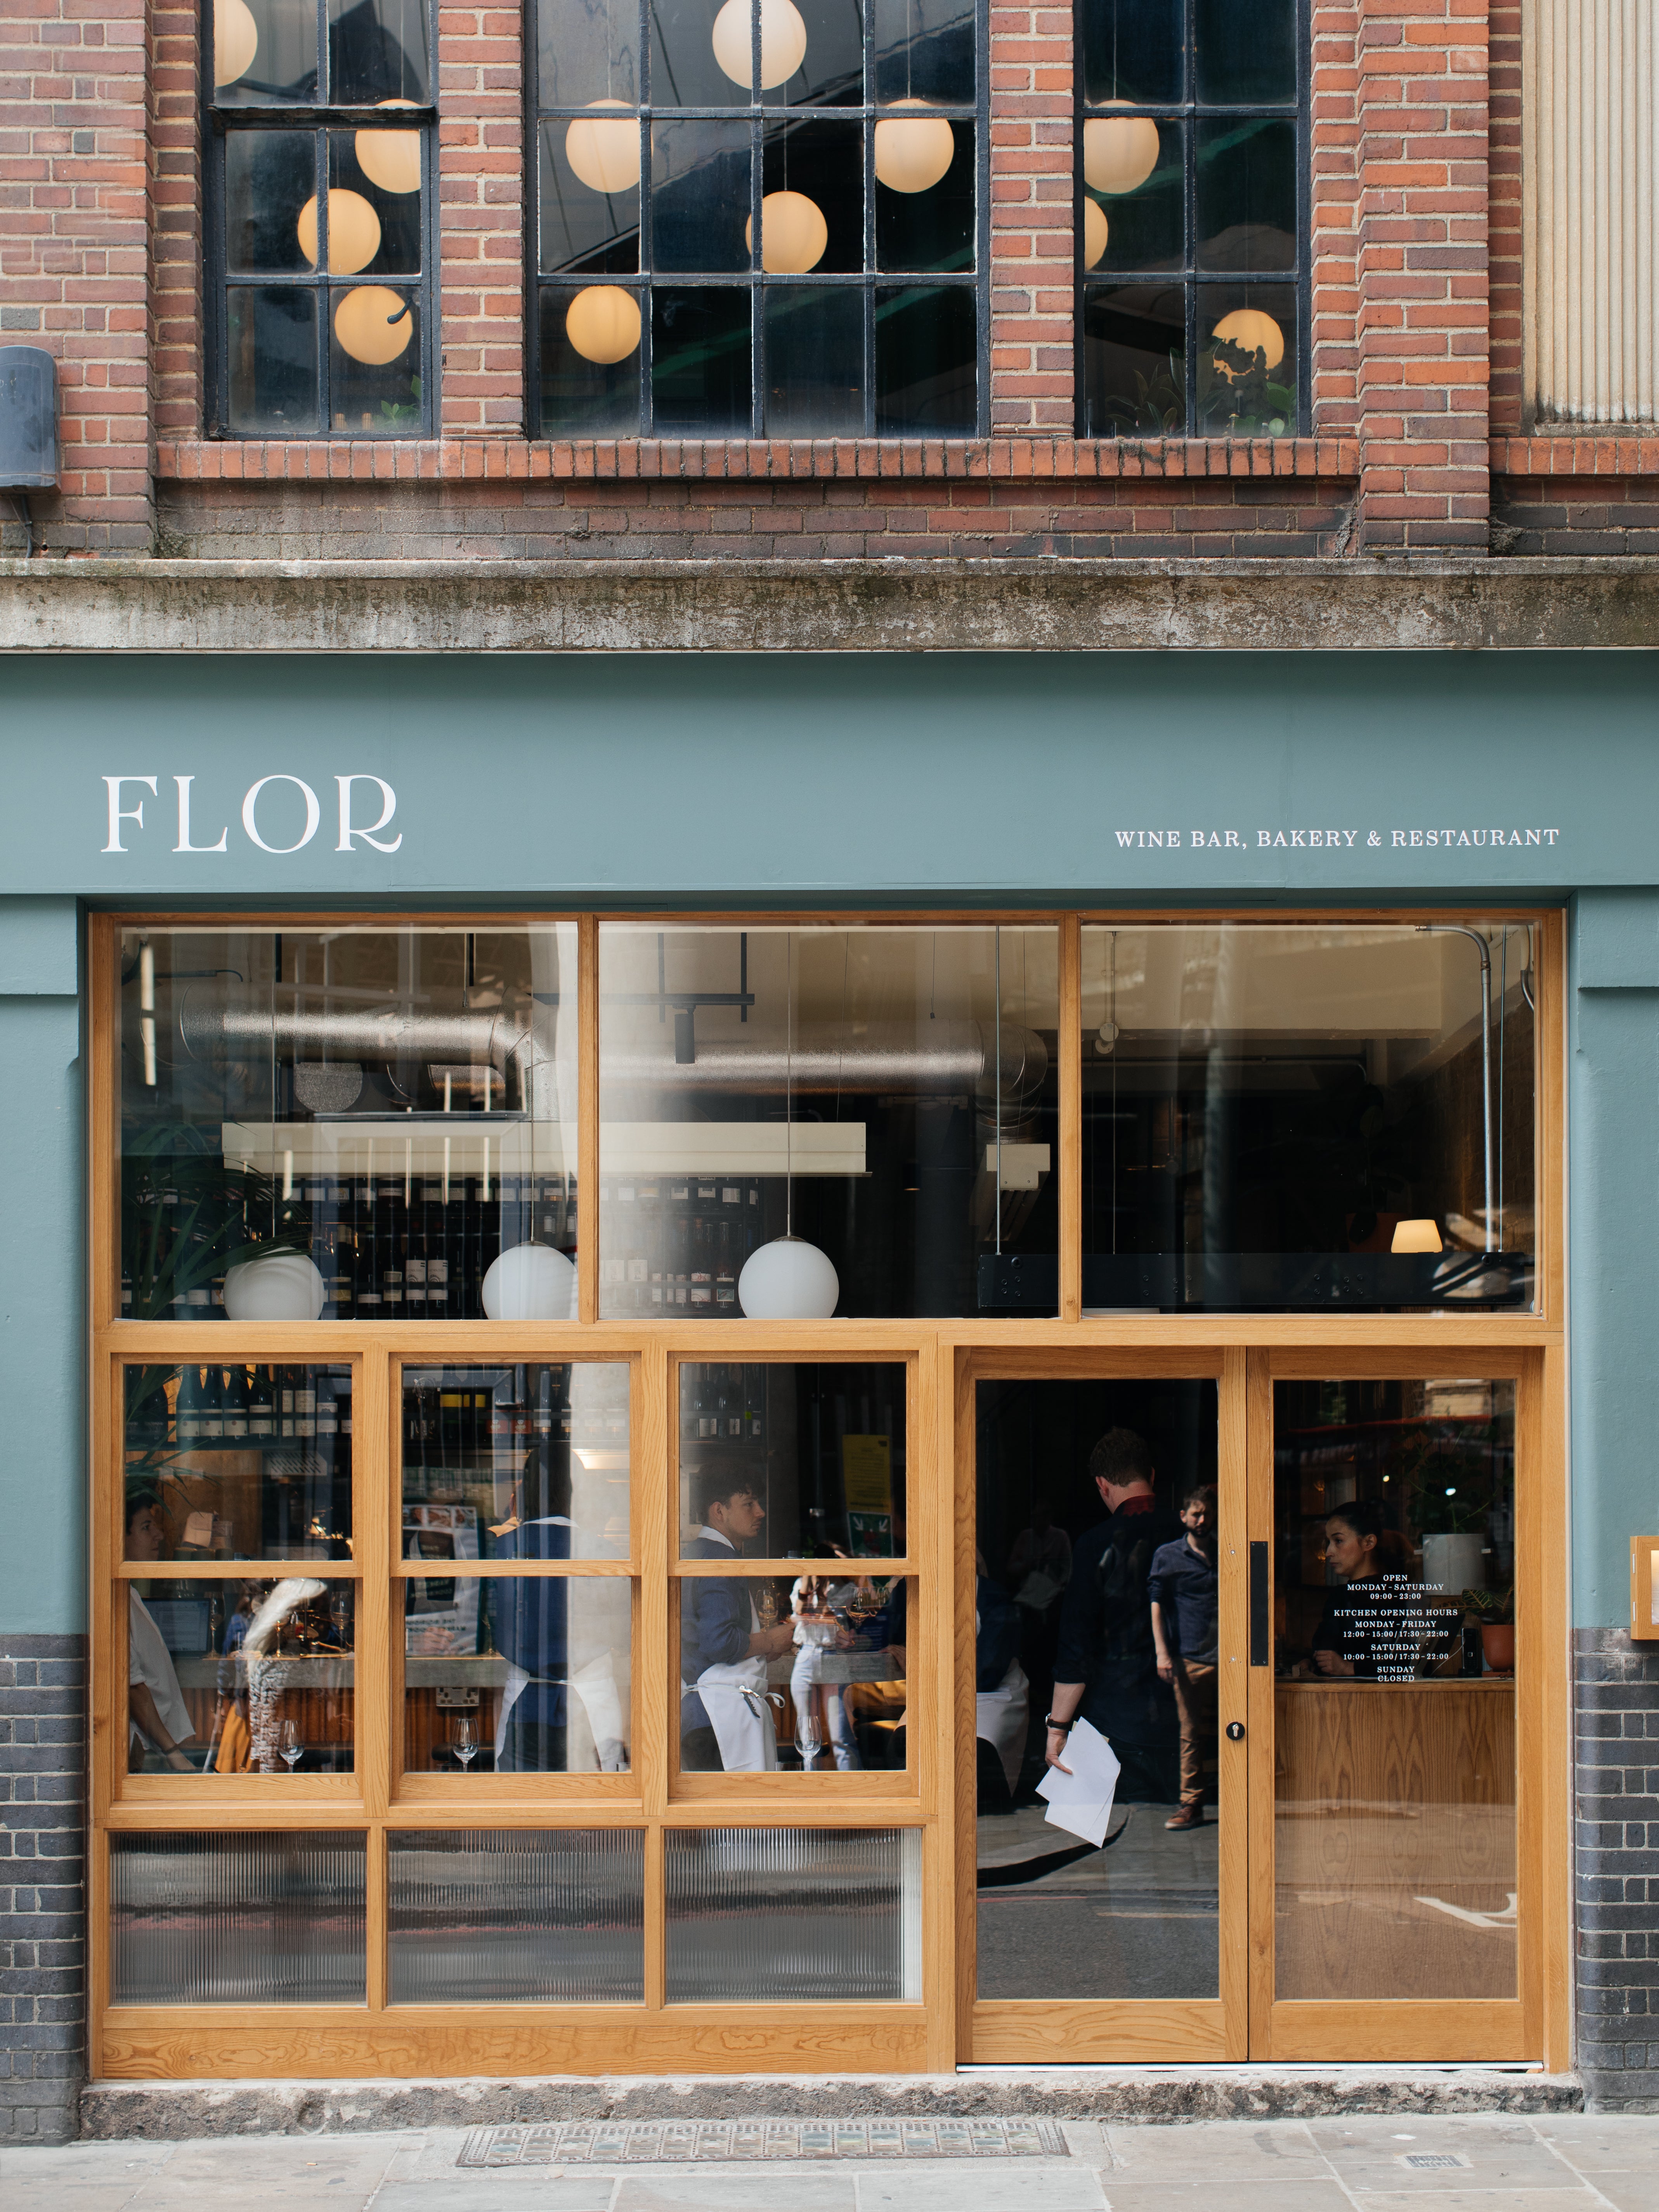 Blink and you’ll miss it: tucked away beneath the railway, Flor epitomises the term hole in the wall